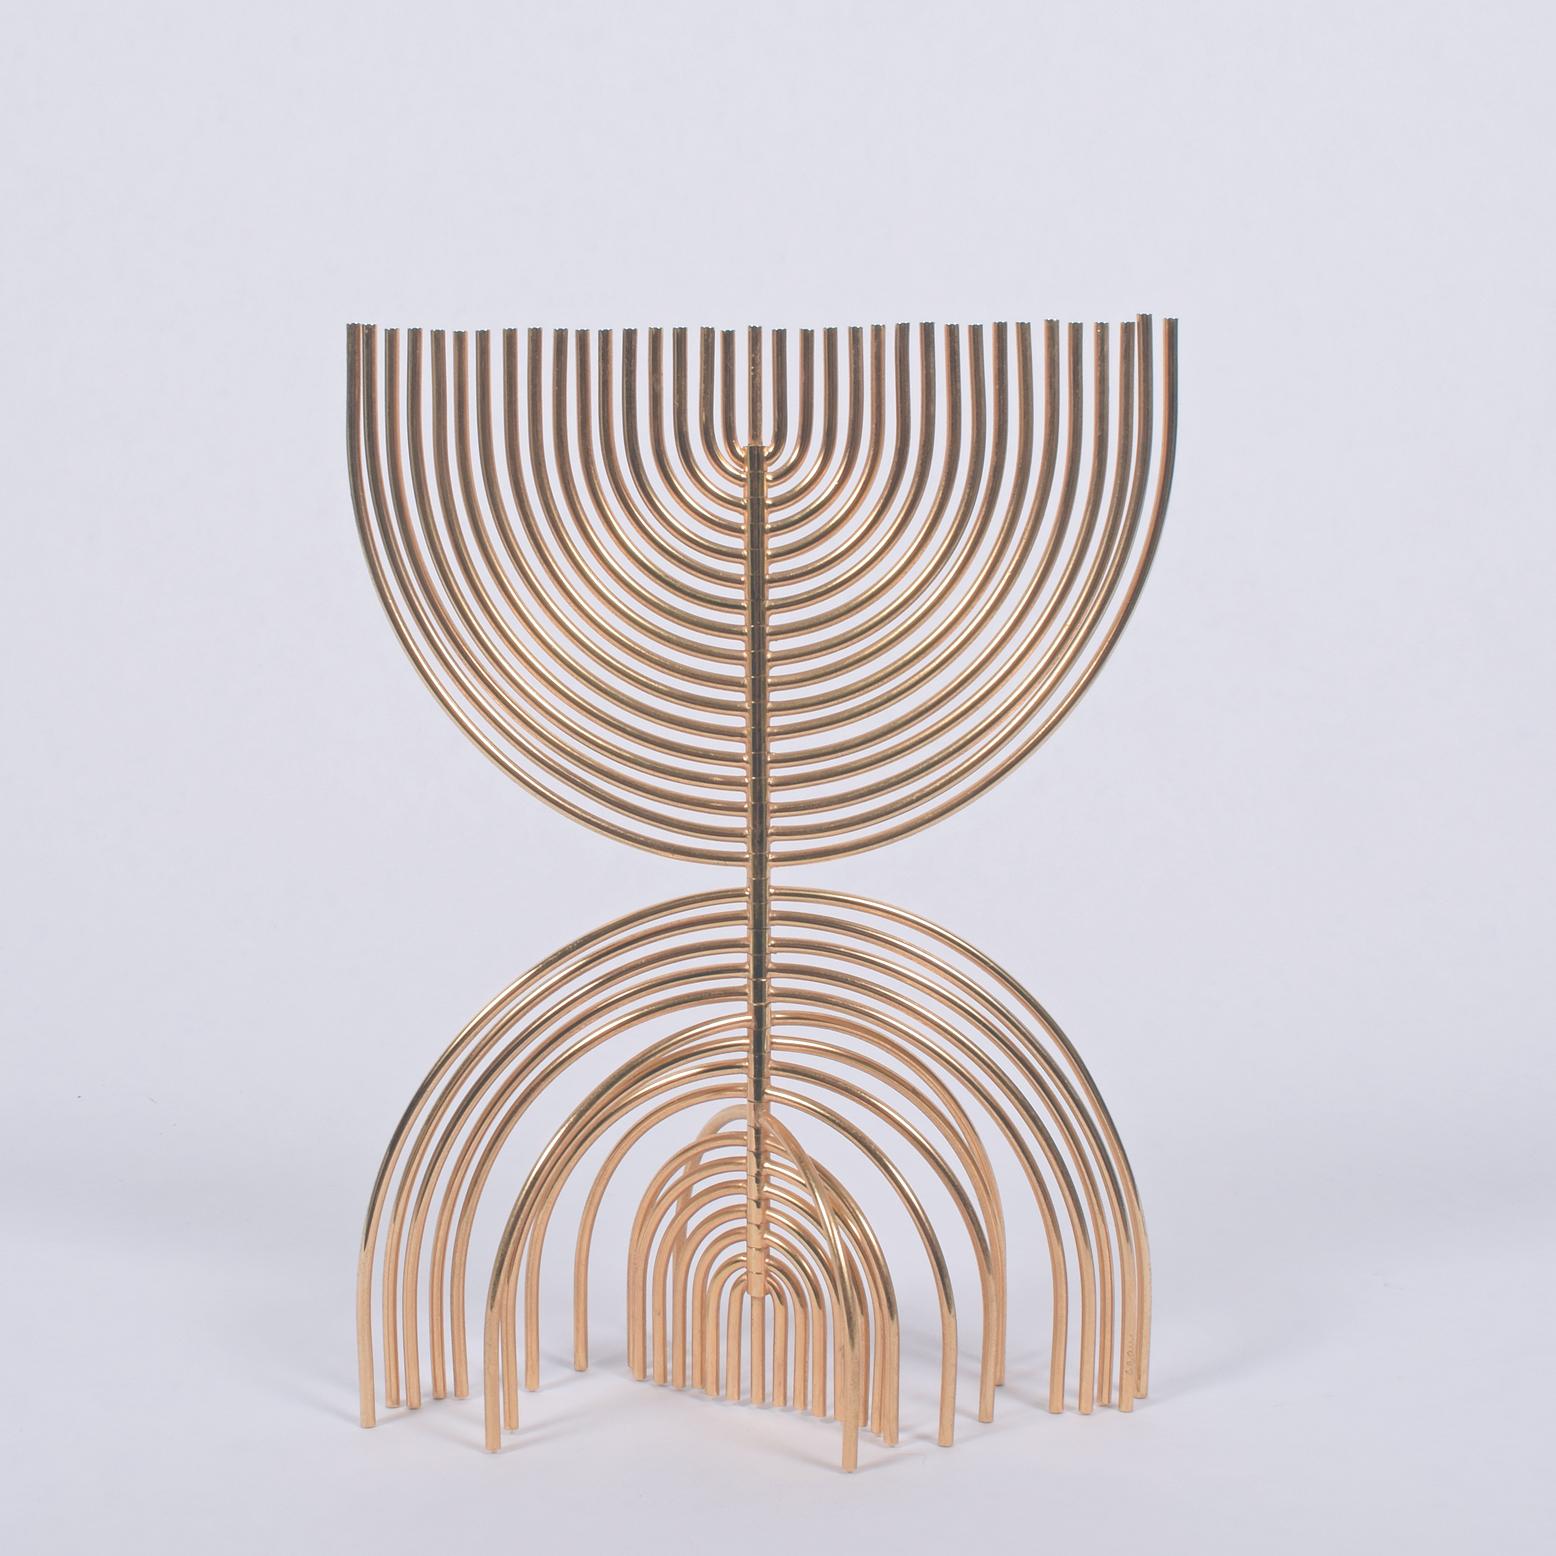 Signed and numbered Agam 300/900 Kinetic sculpture solid brass with 24-carat gold plate.